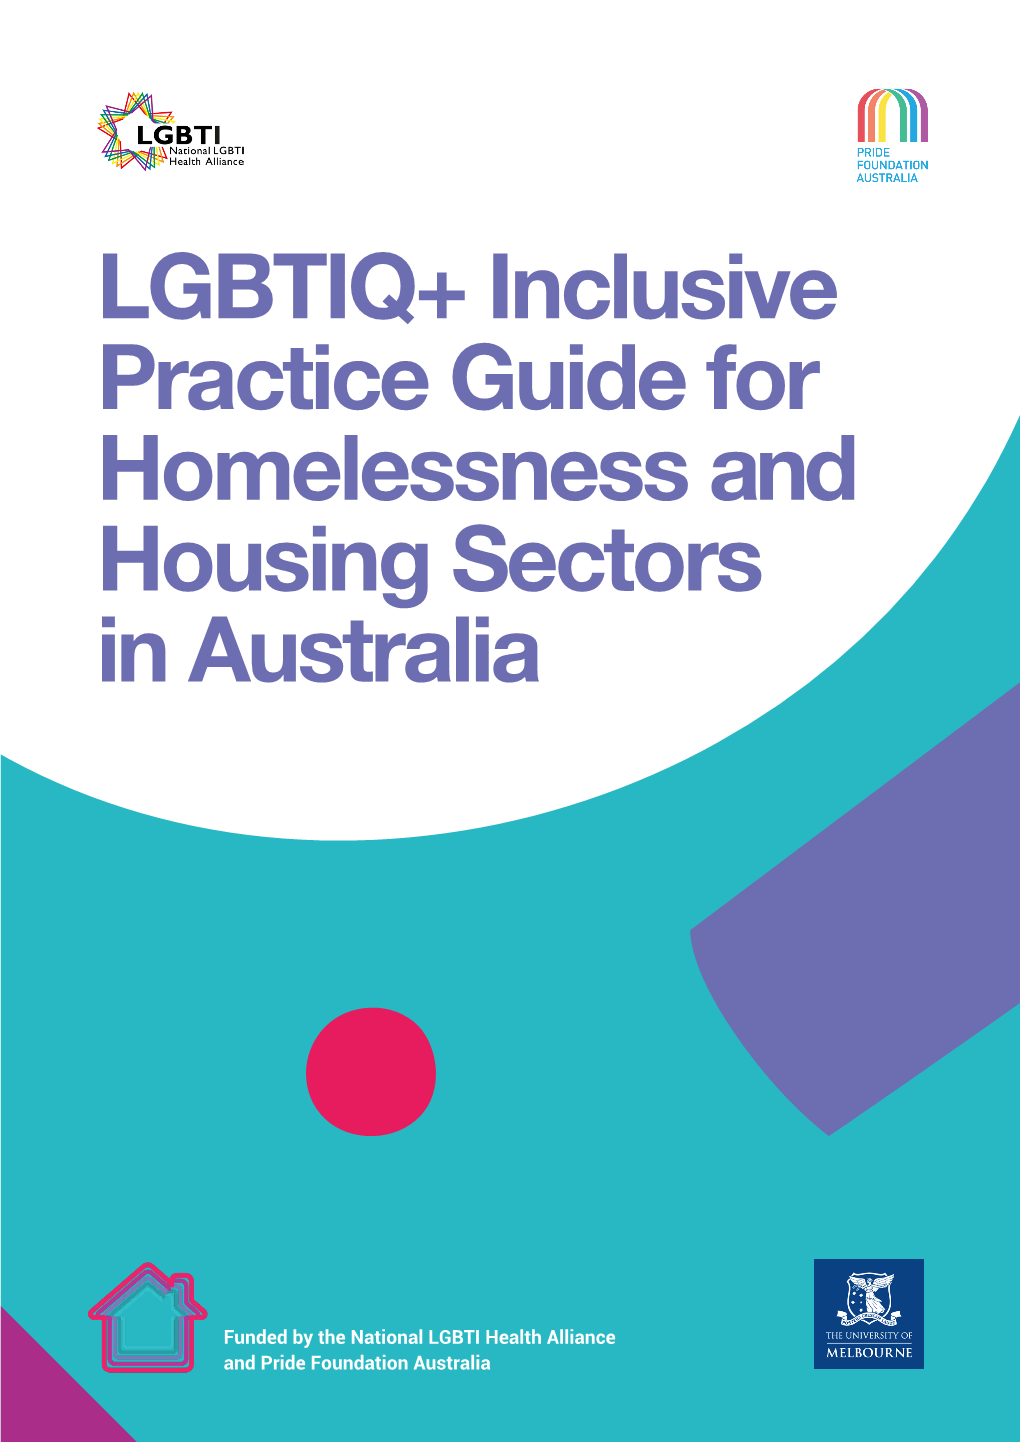 LGBTIQ+ Inclusive Practice Guide for Homelessness and Housing Sectors in Australia